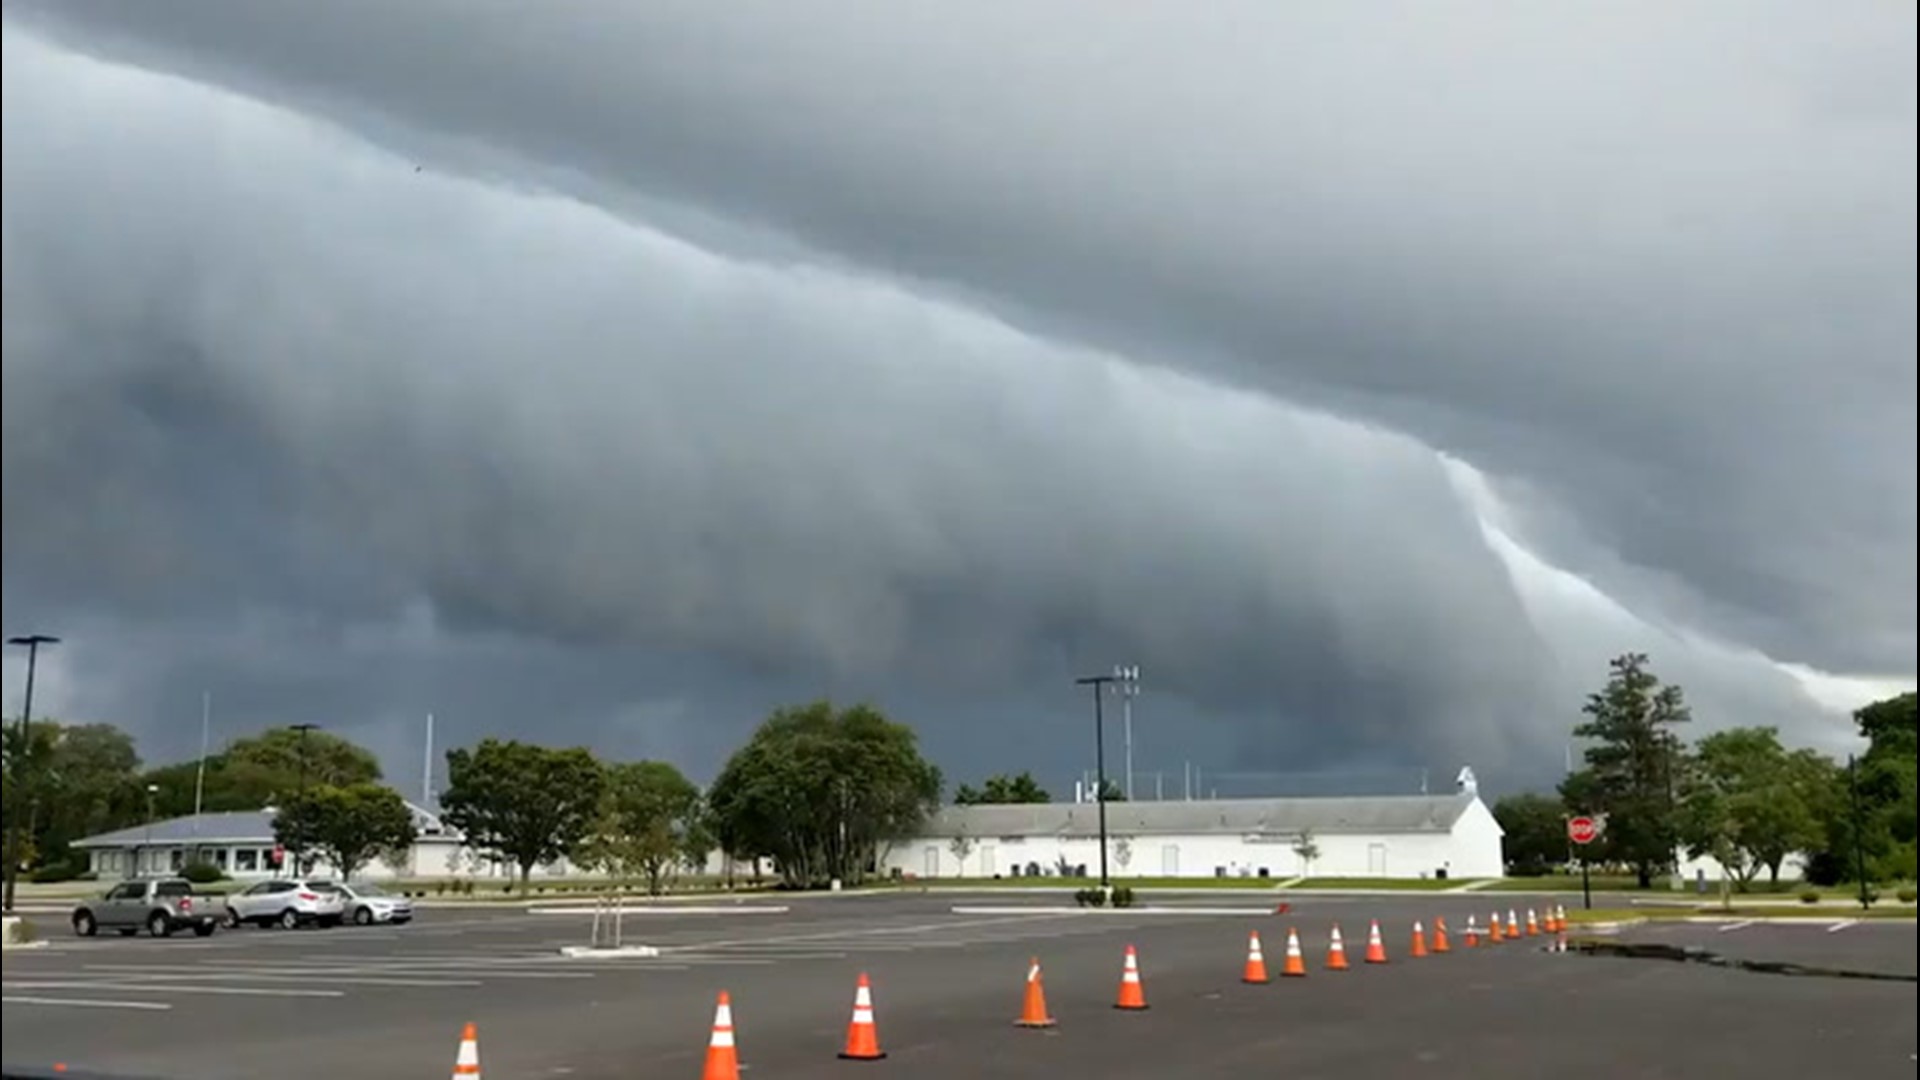 This large, ominous shelf cloud hovered over Rio Grande, New Jersey, on Aug. 6 during a severe storm.